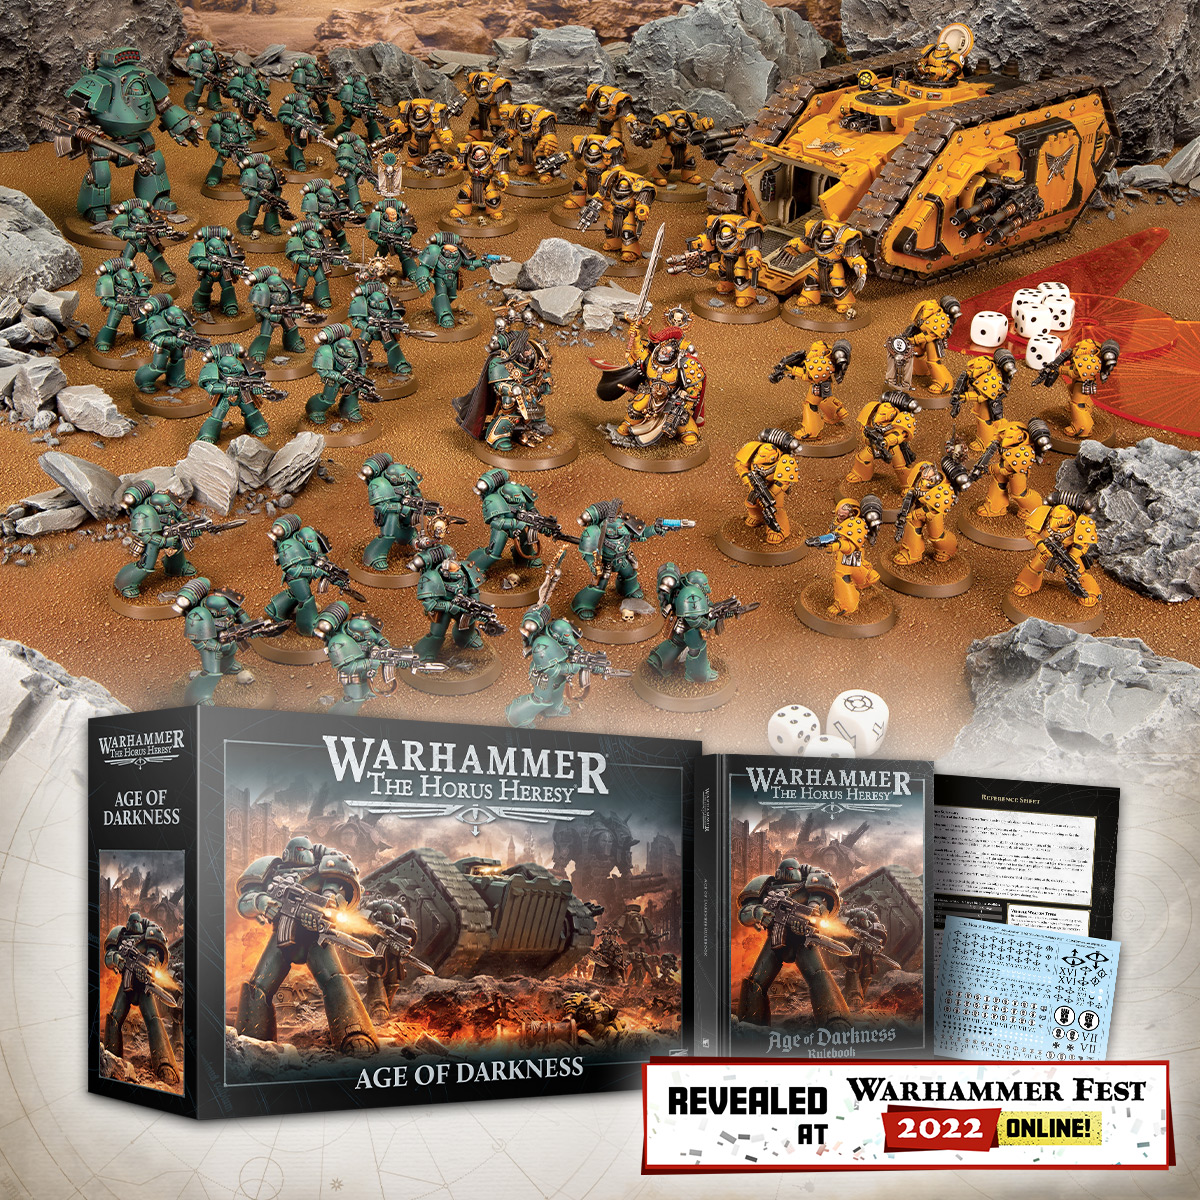 Warhammer: The Horus Heresy Age of Darkness box contents